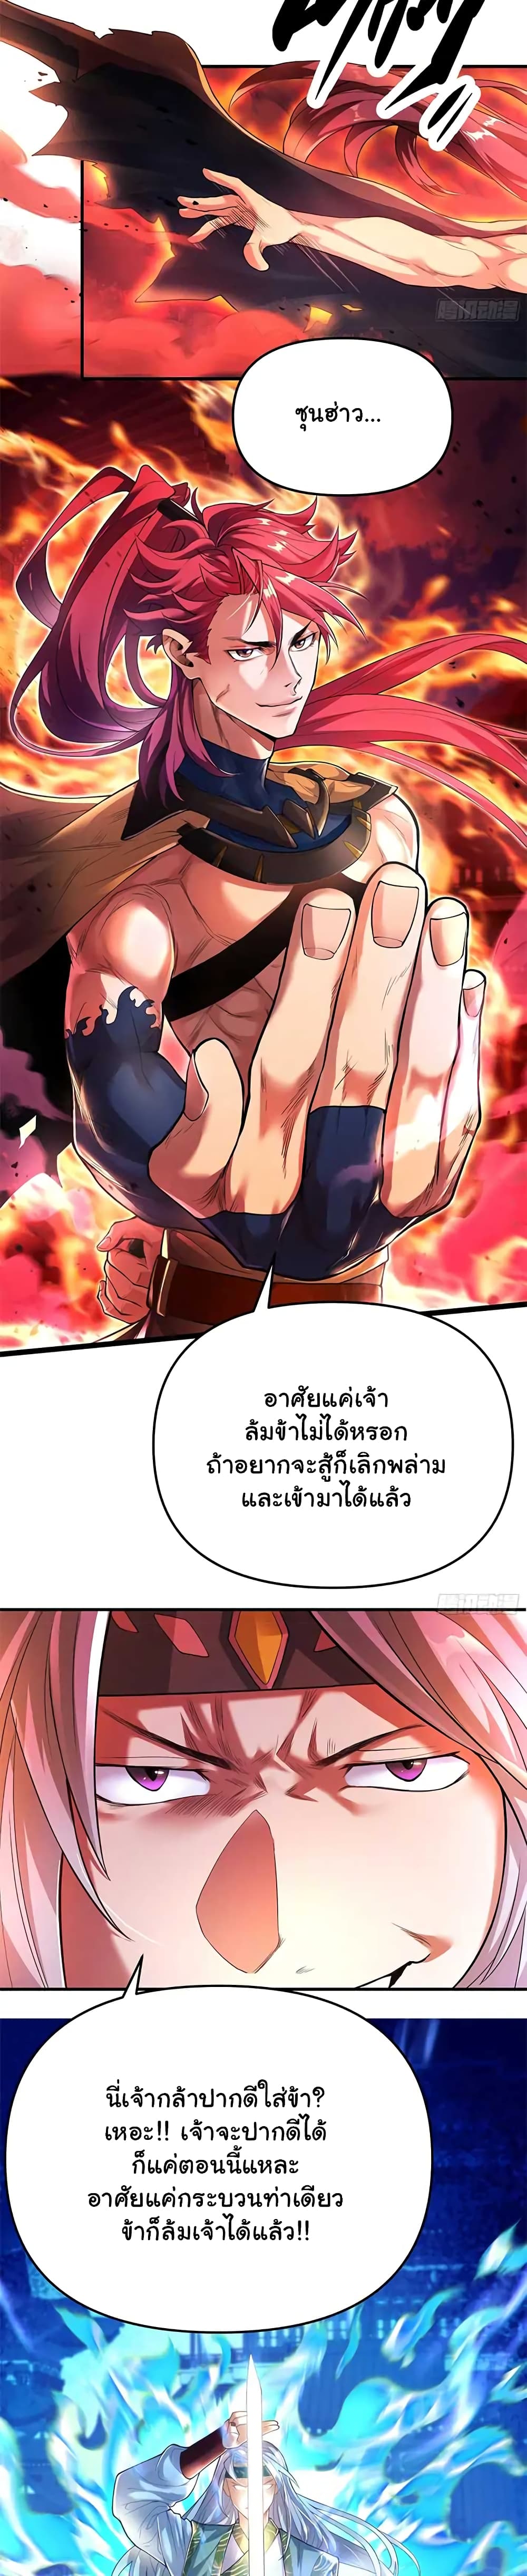 Undercover for Ten Years, I Became a Great Villain of the Demon Sect 1 แปลไทย